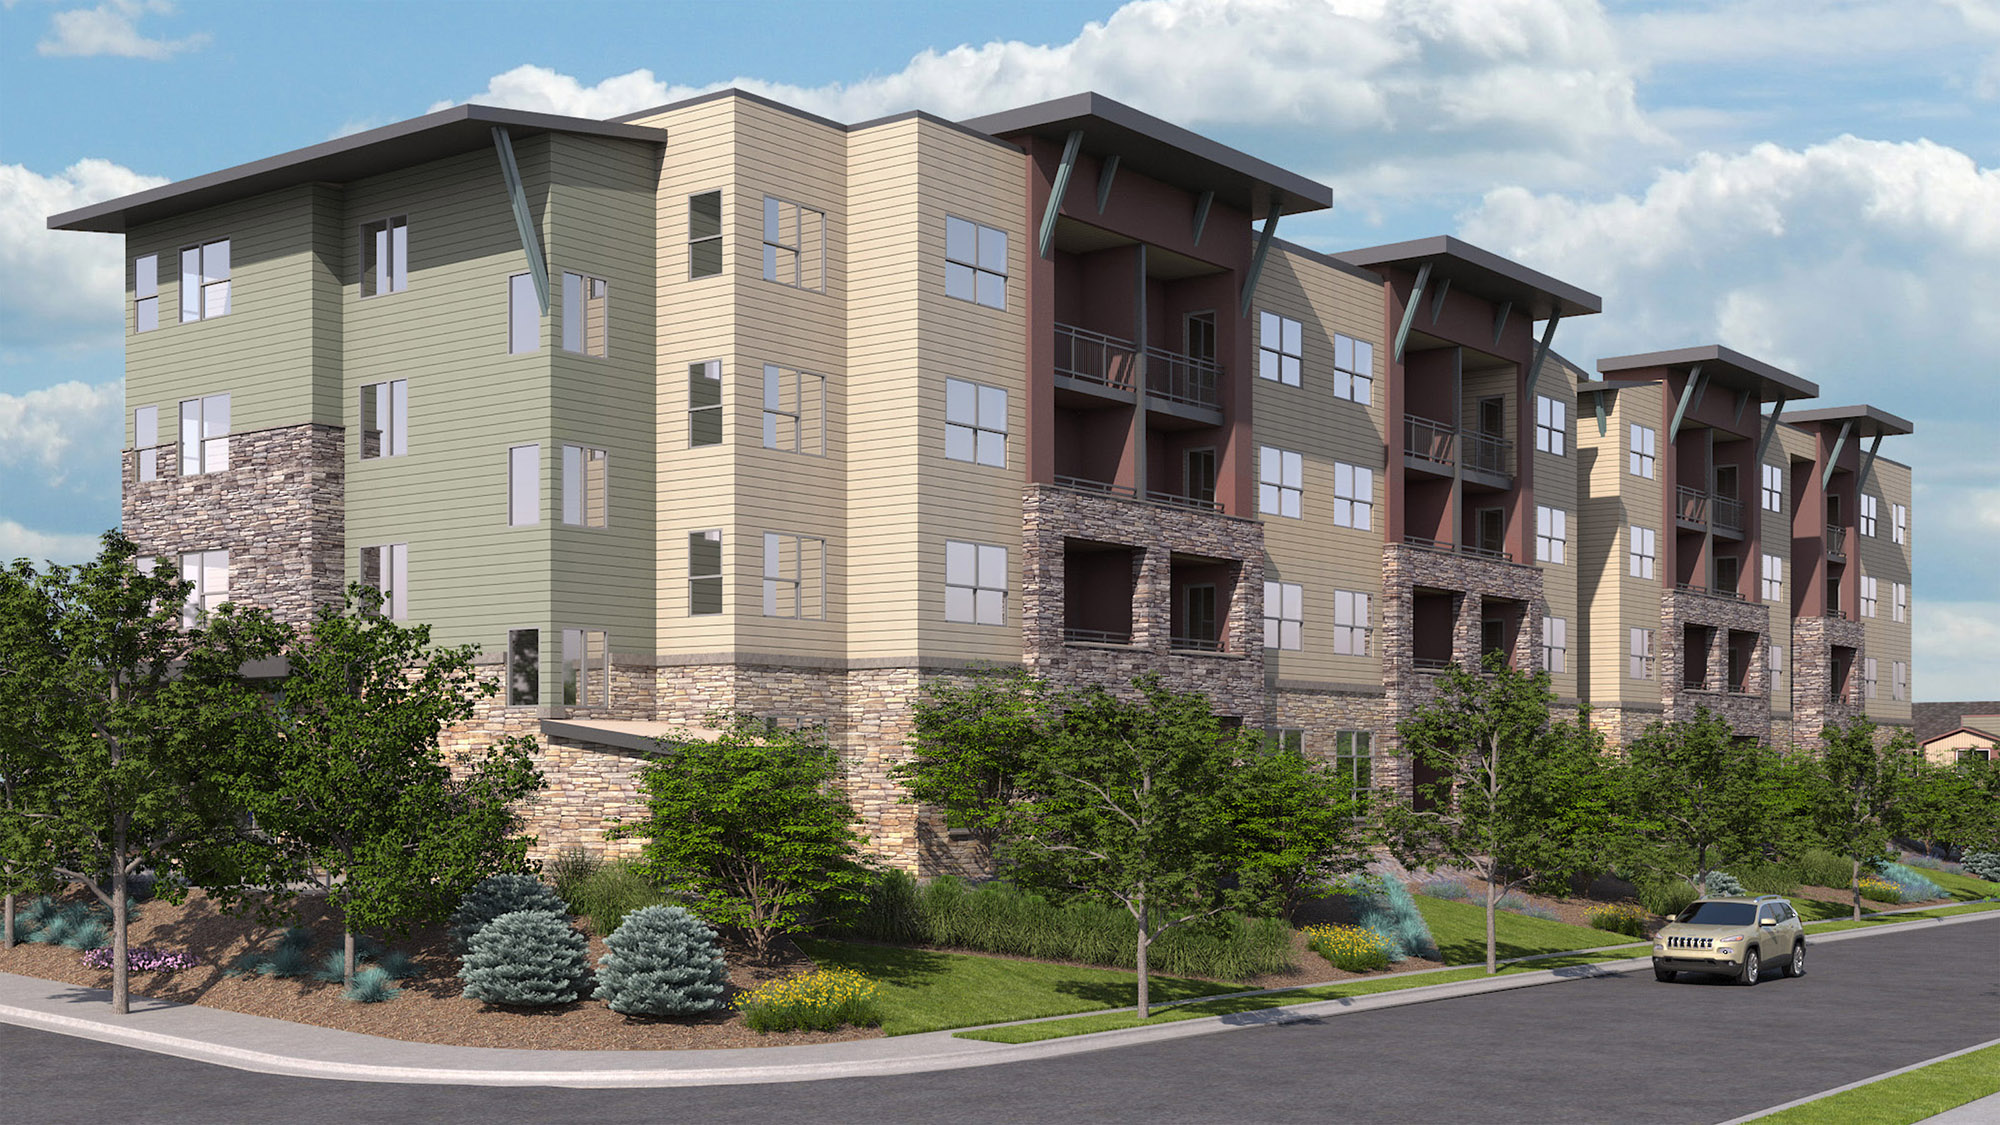 rendering of south east corenr of northwest apartments